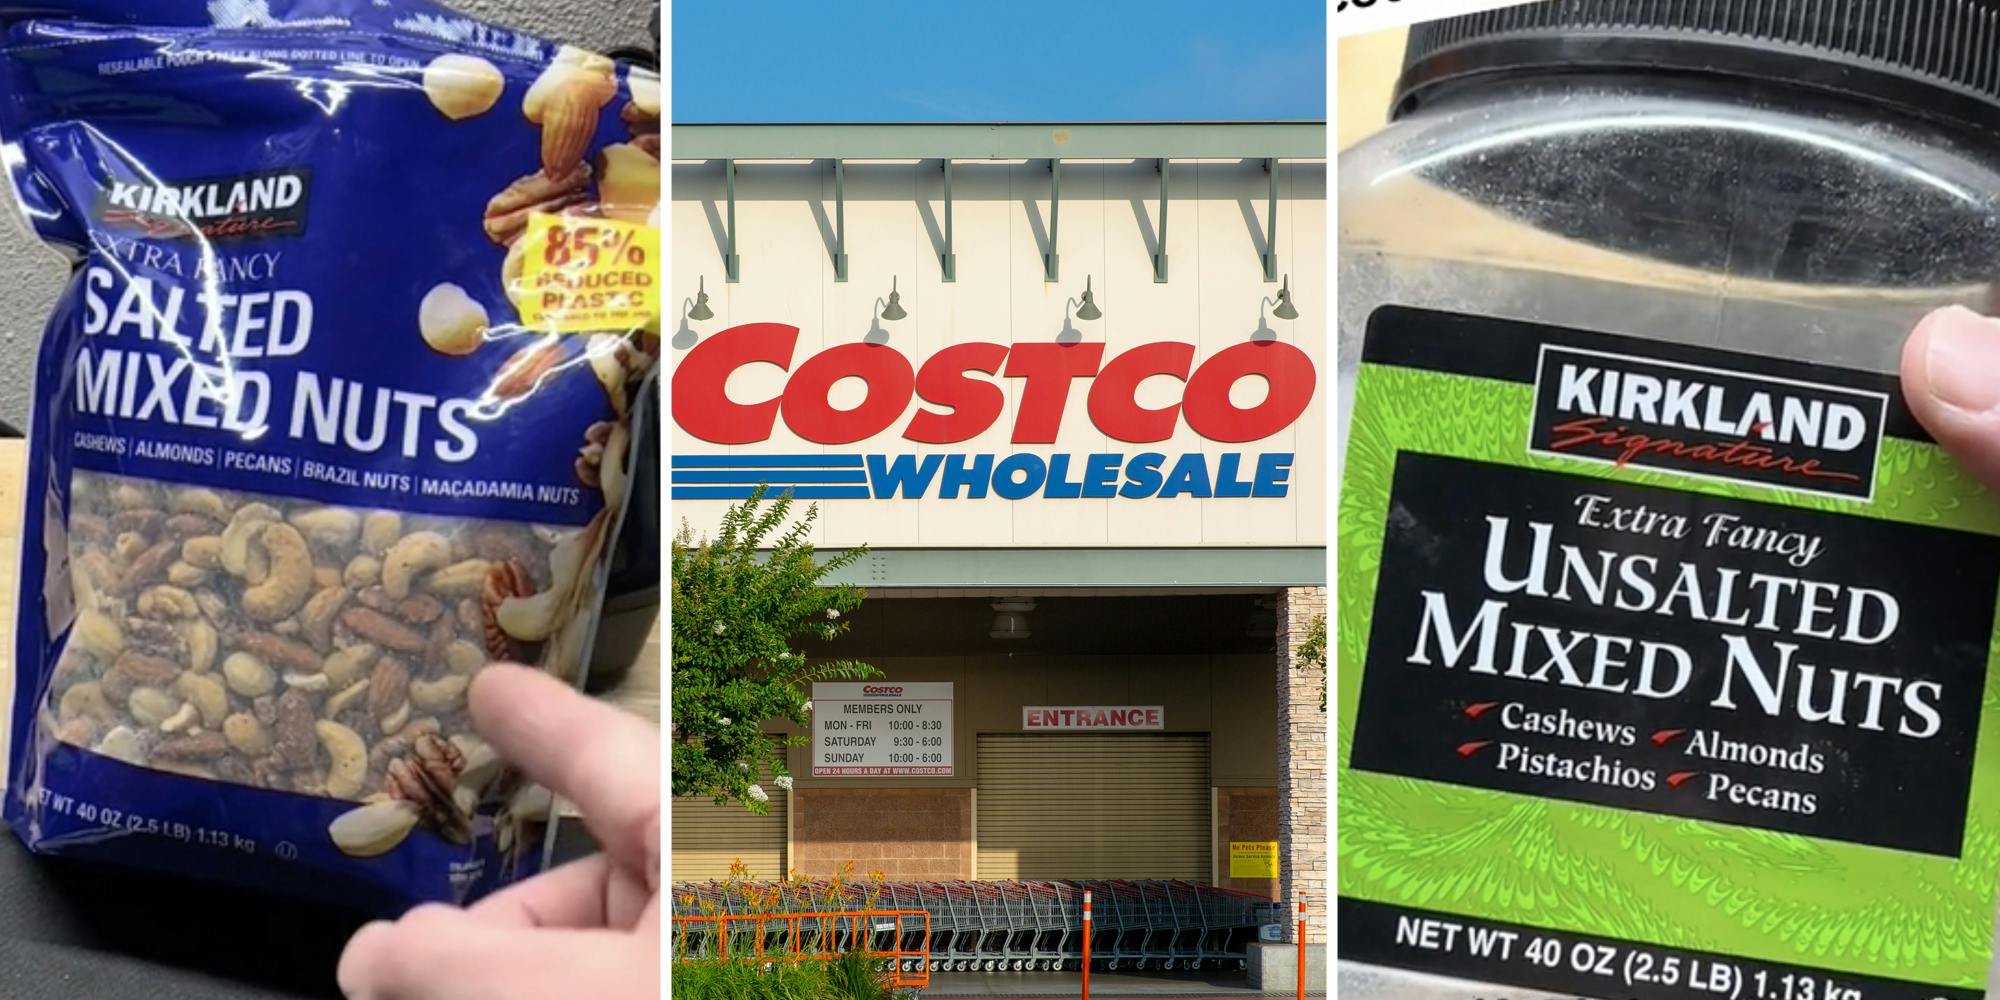 ‘That’s nuts!’: Costco lowered the price of mixed nuts by $4 and changed the packaging. Is it still the same amount?